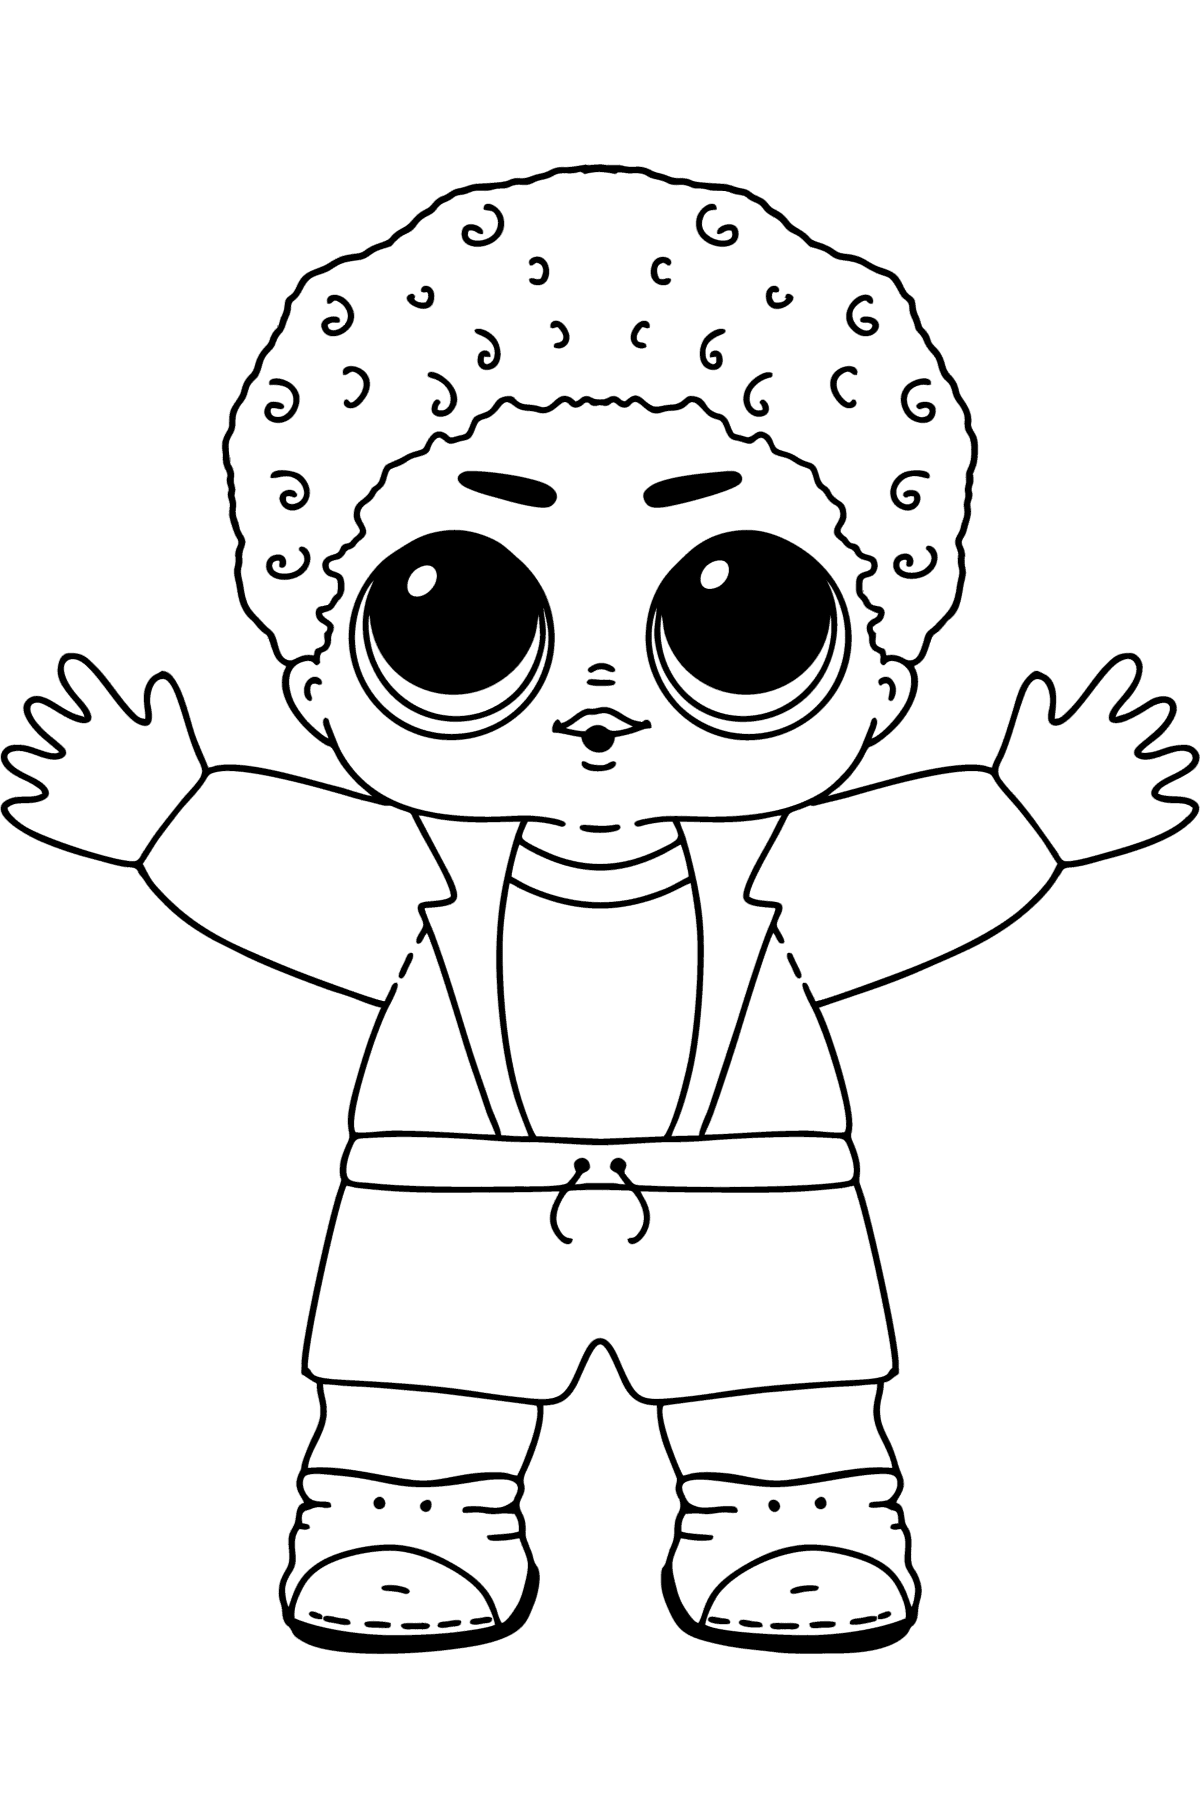 Coloring page LOL boy King - Coloring Pages for Kids